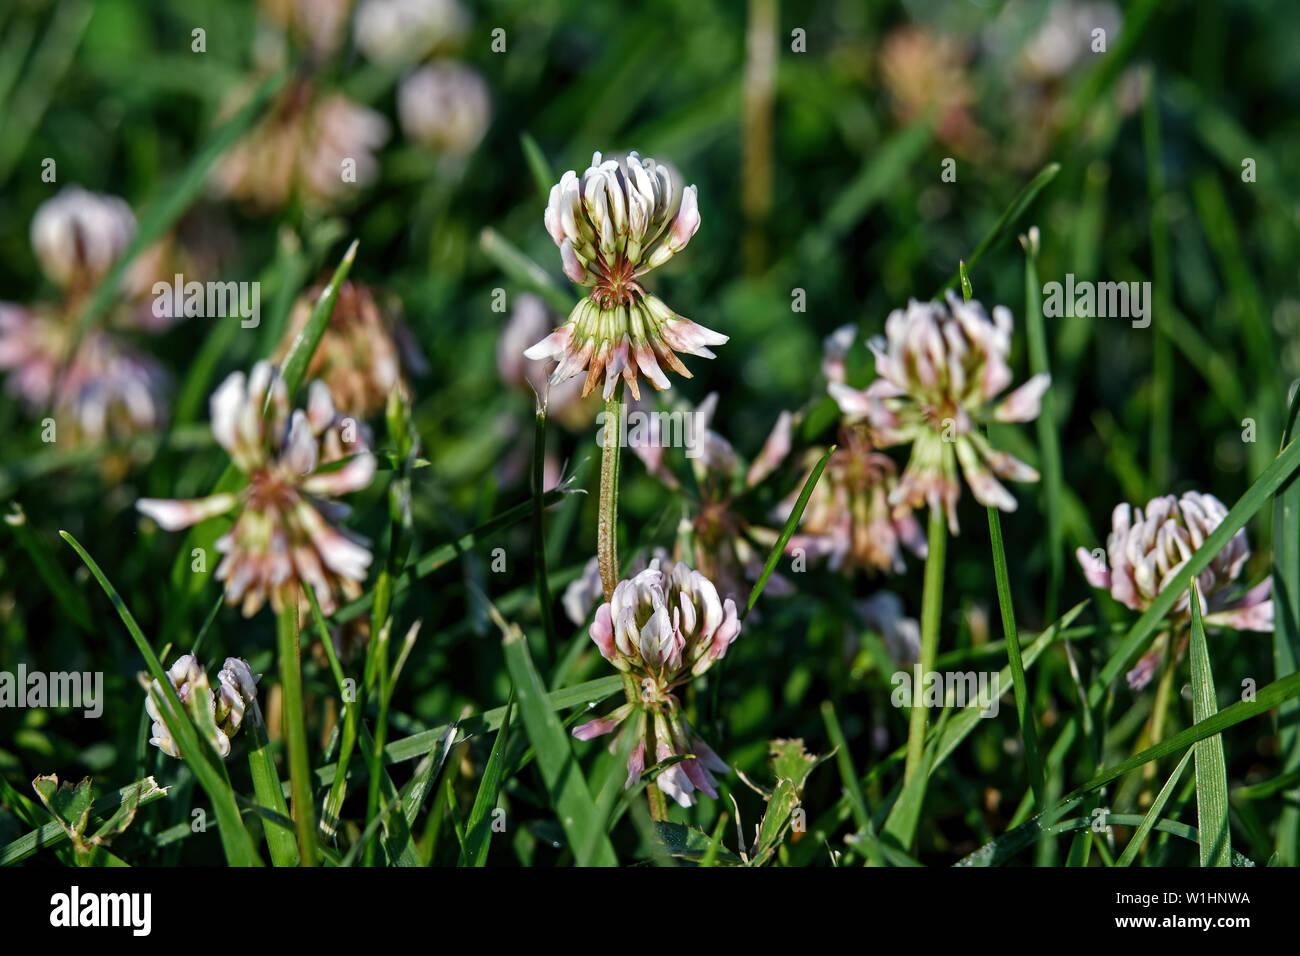 White clover in early morning light. Known as Trifolium repens it is a herbaceous perennial plant in the bean family Fabaceae. Stock Photo